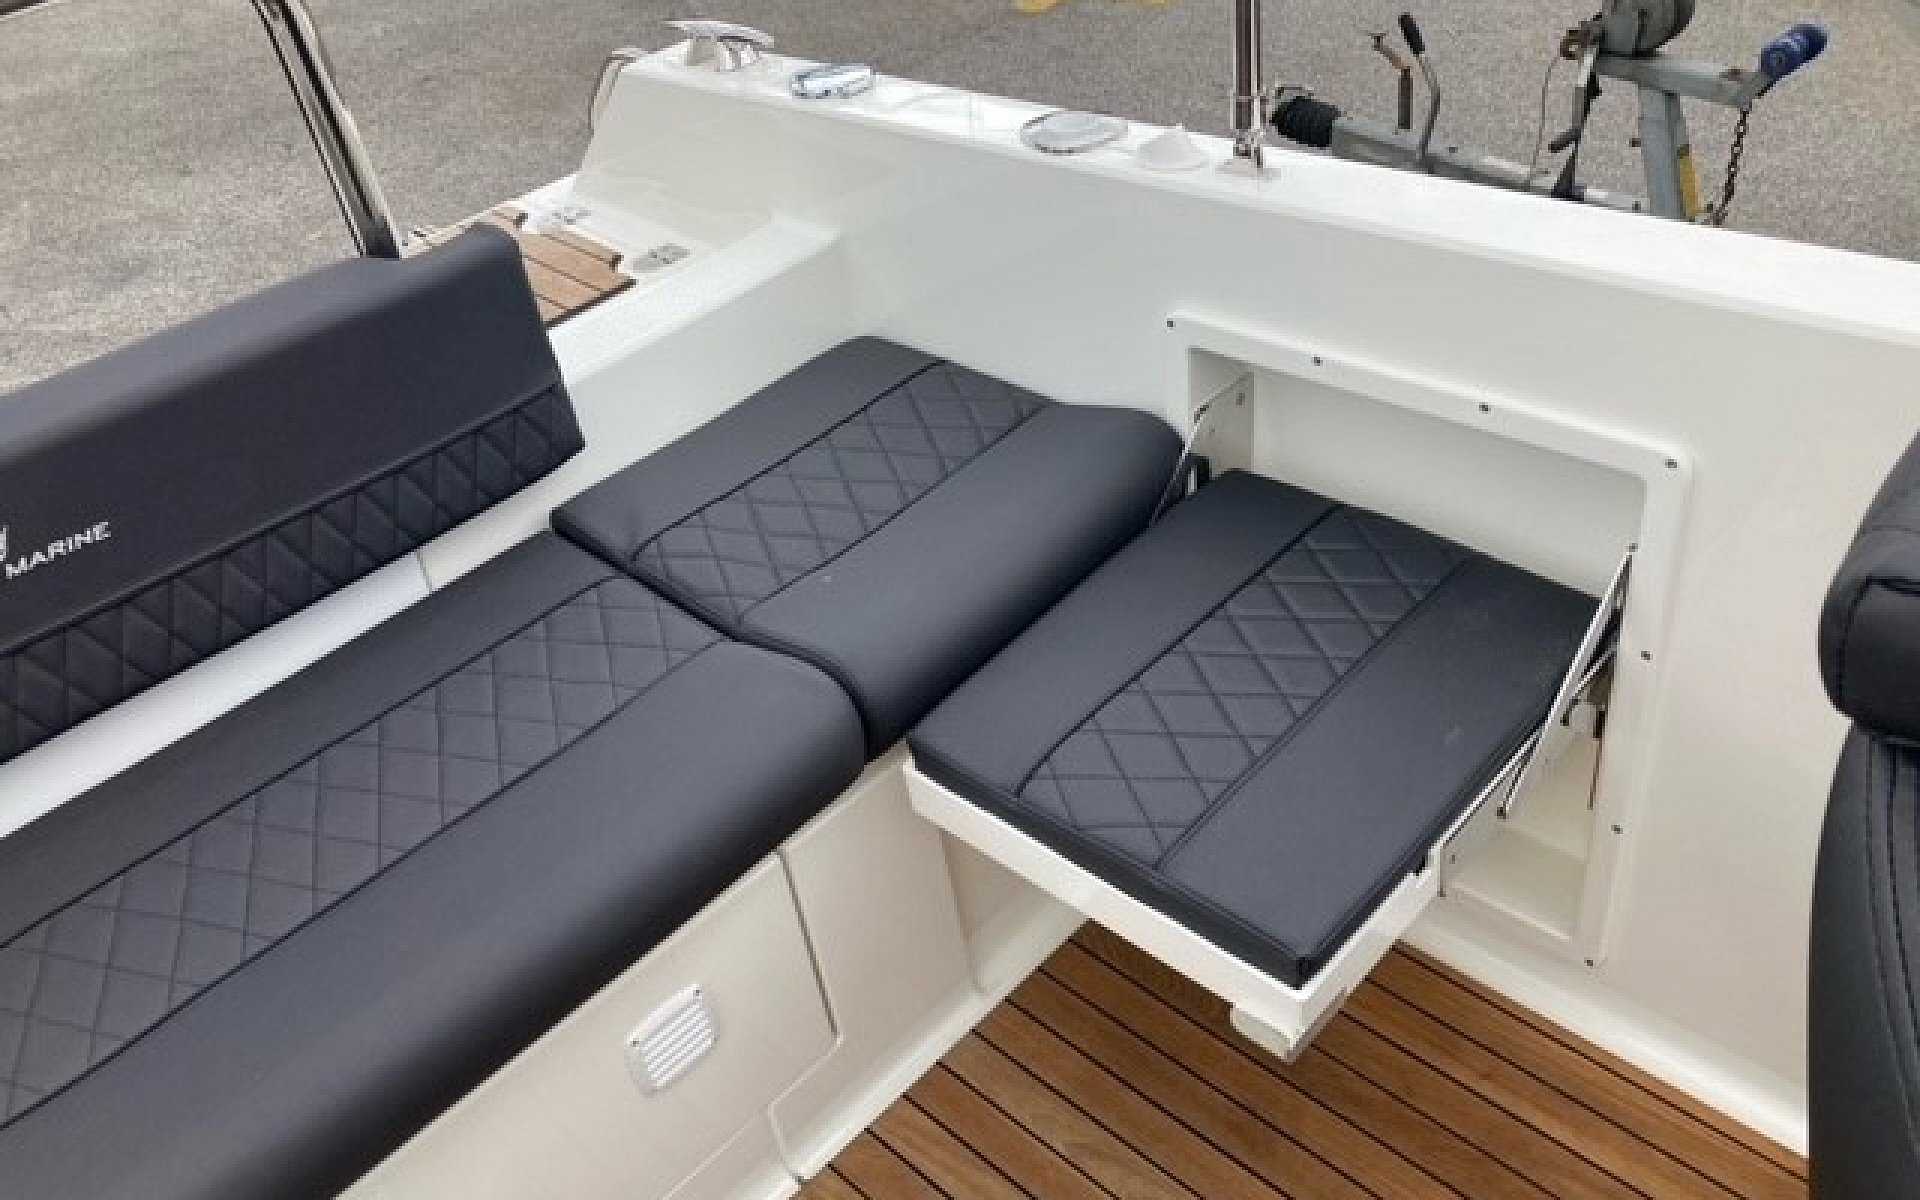 ATLANTIC 730 SUN CRUISER bench image new boats for sale in UK 